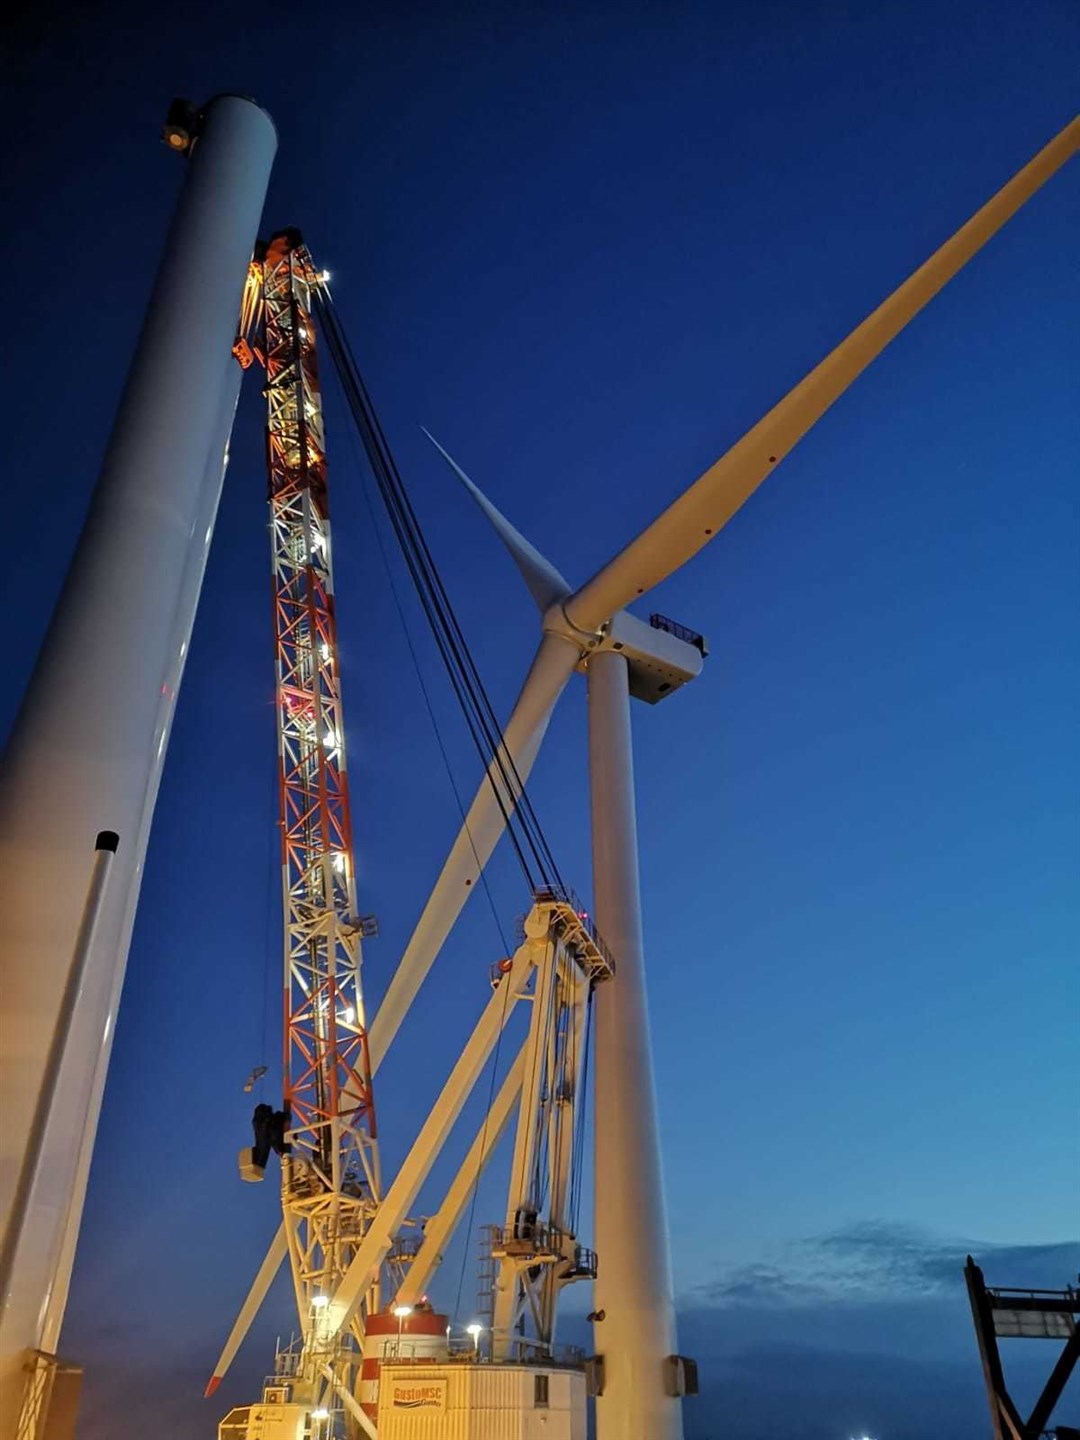 The first wind turbine has been erected at the Moray East offshore wind farm.